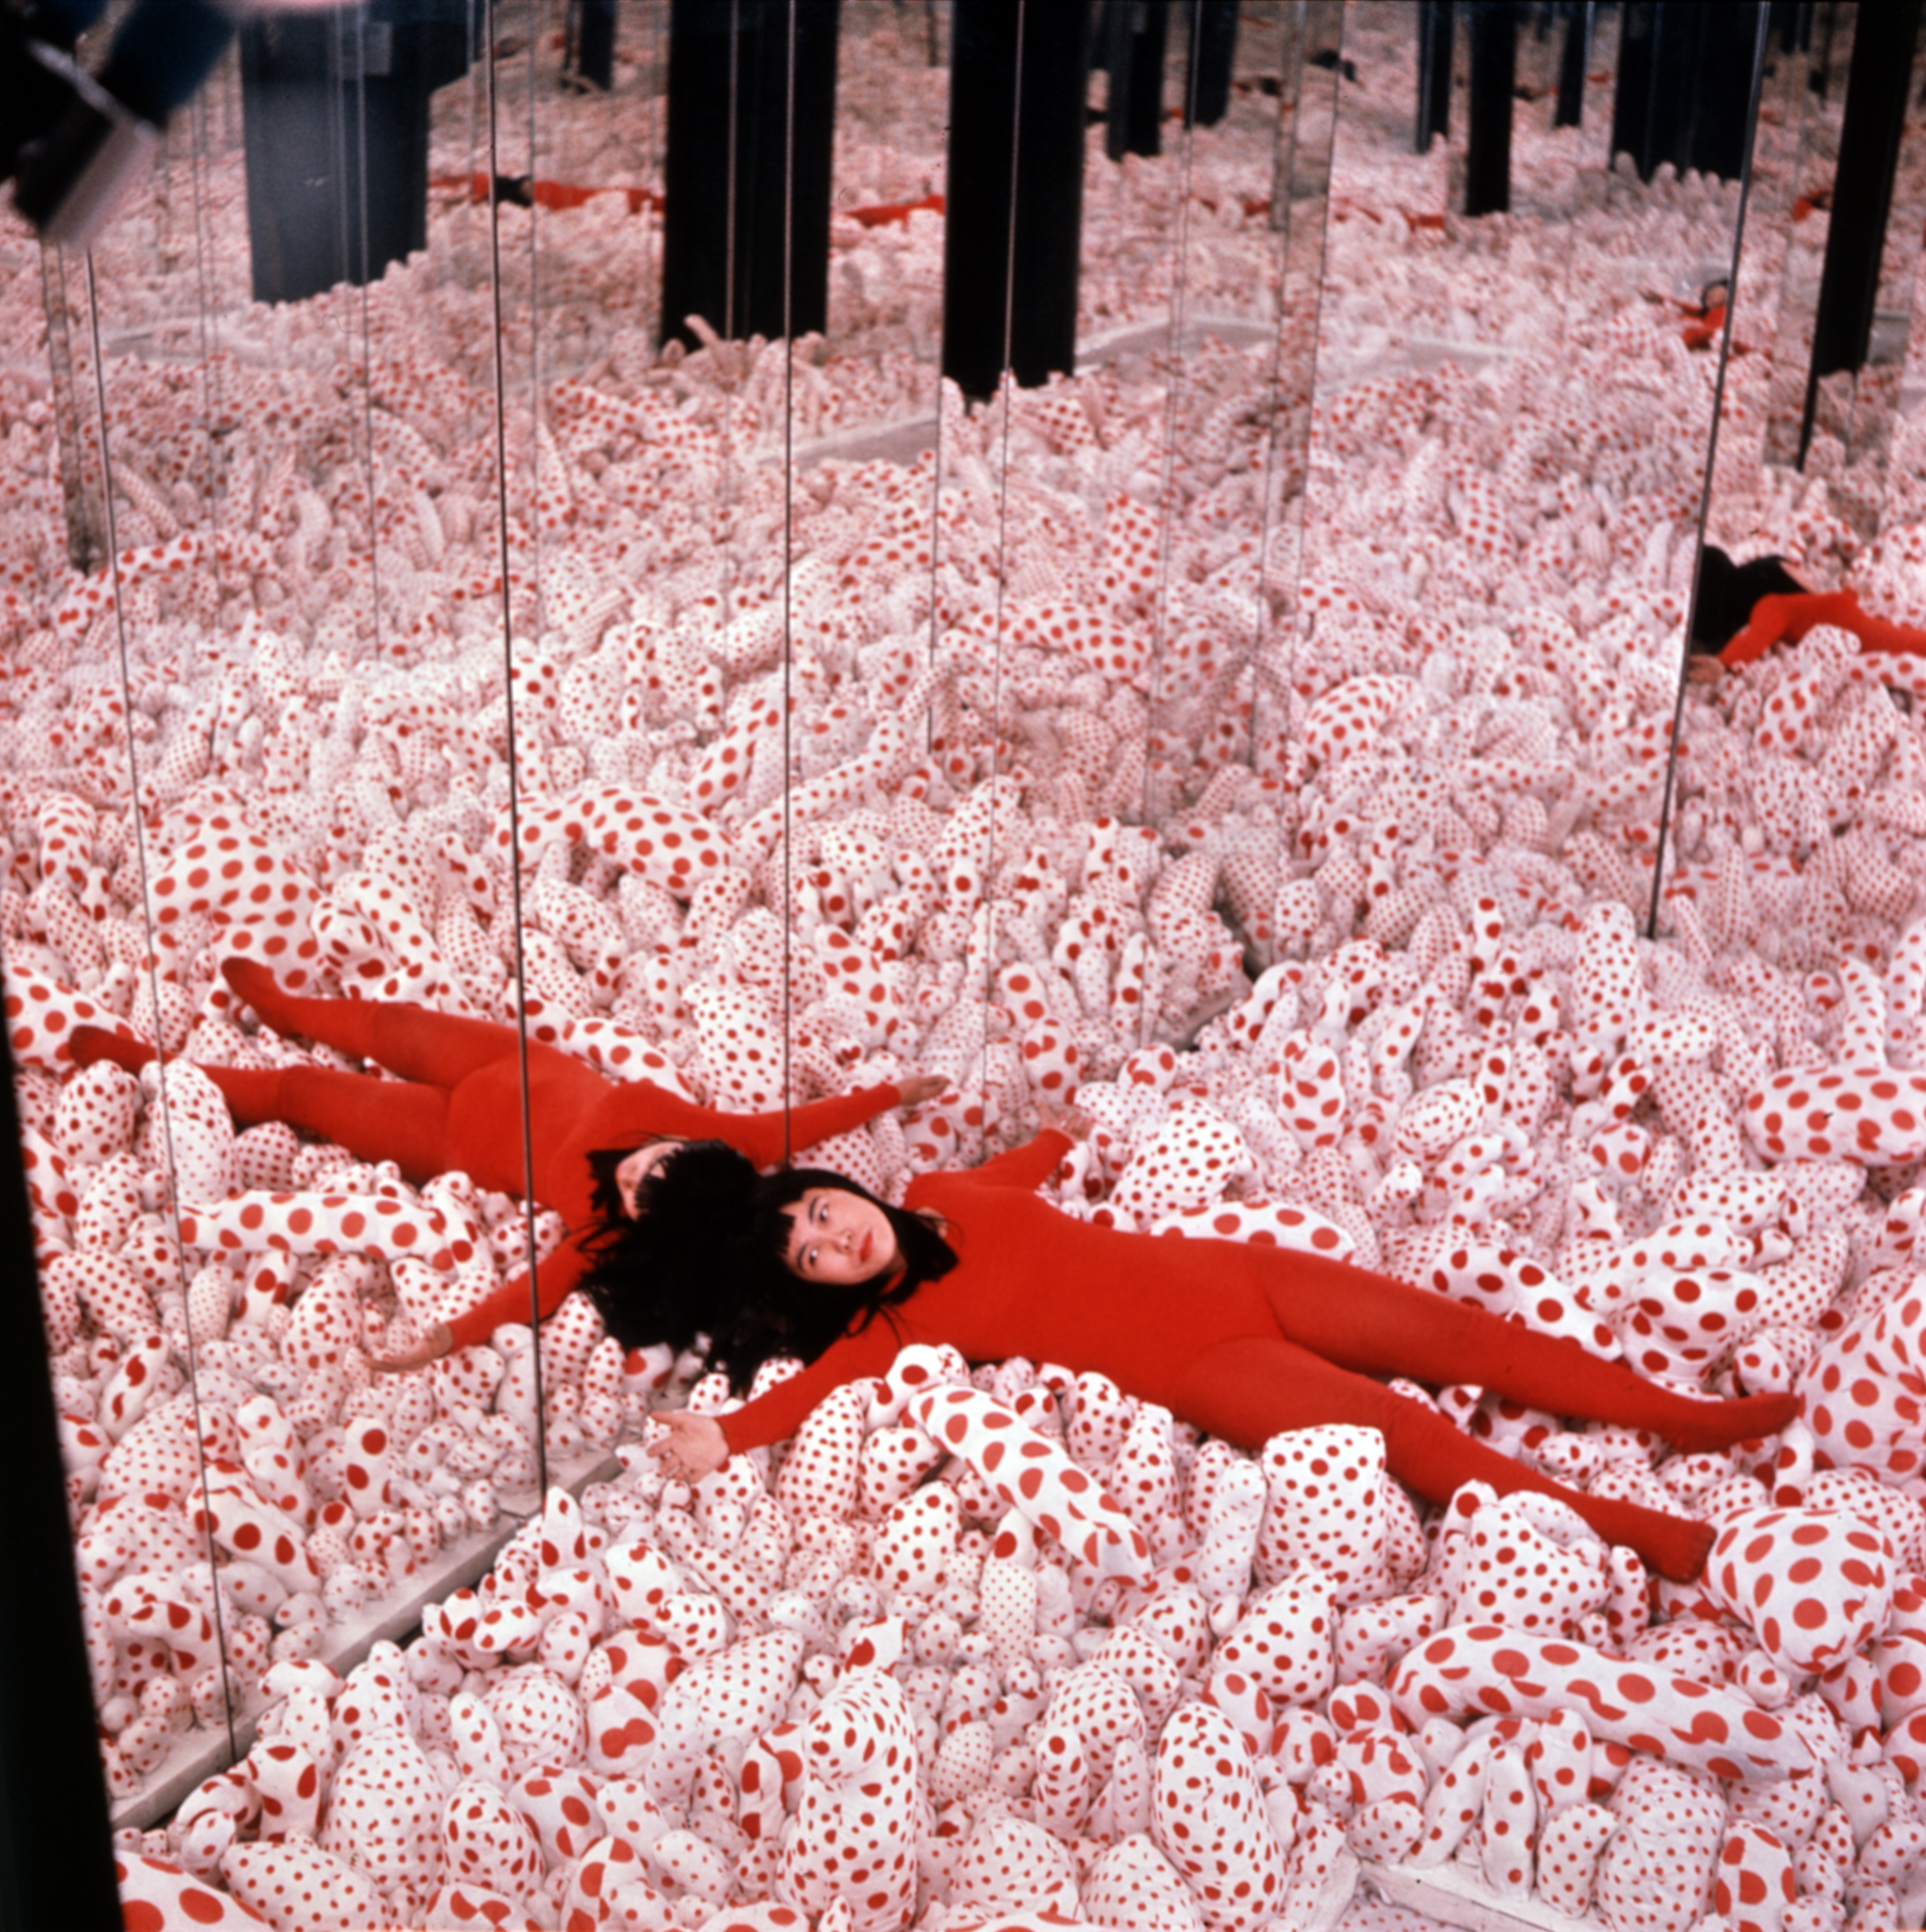 Why Is Yayoi Kusama Obsessed With Pumpkins